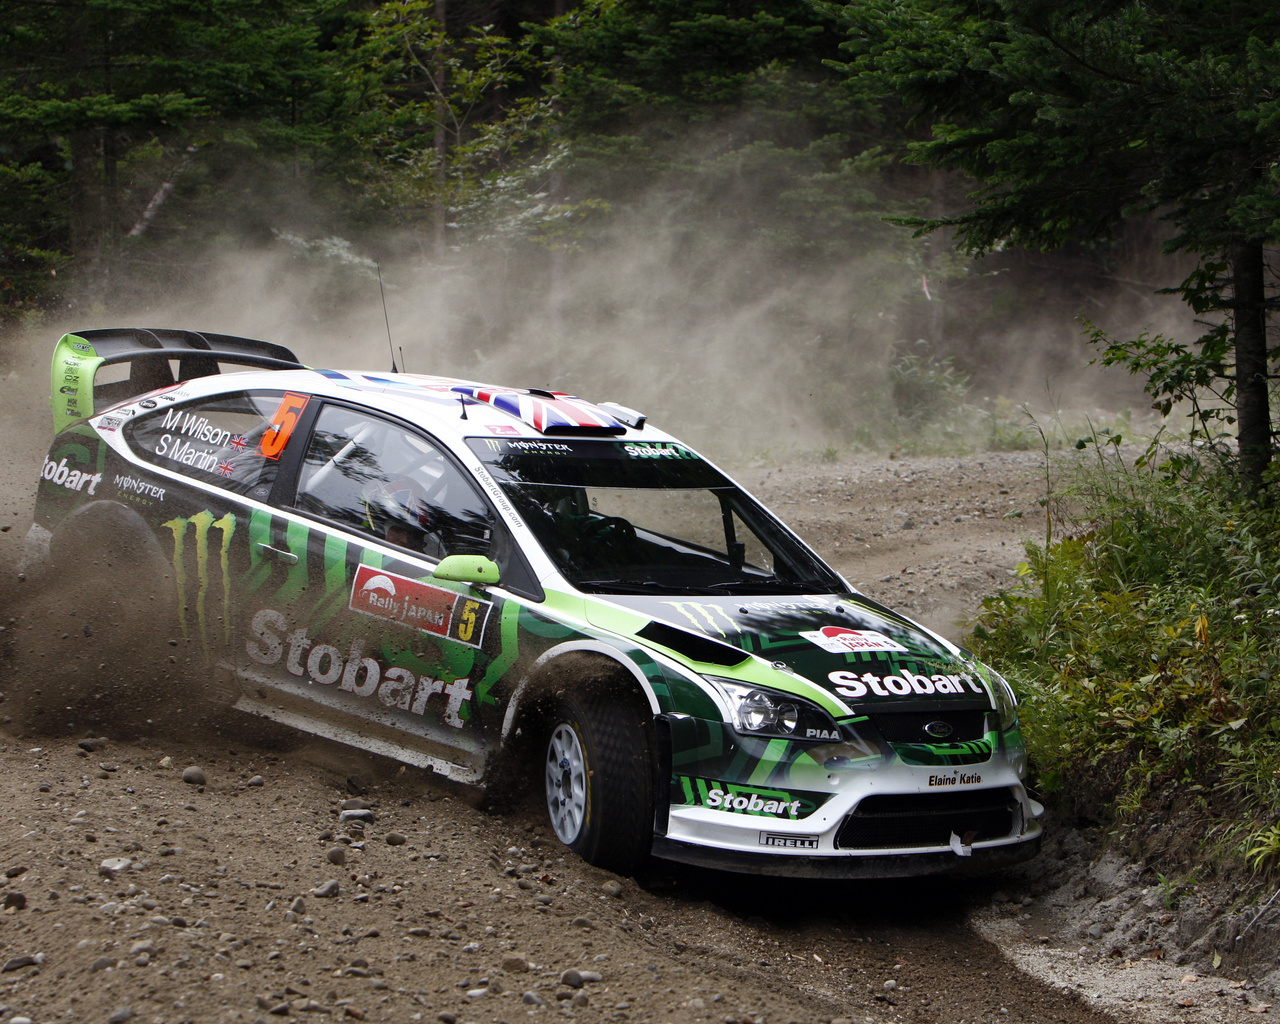 Wrc, rally, monster, ford focus, british